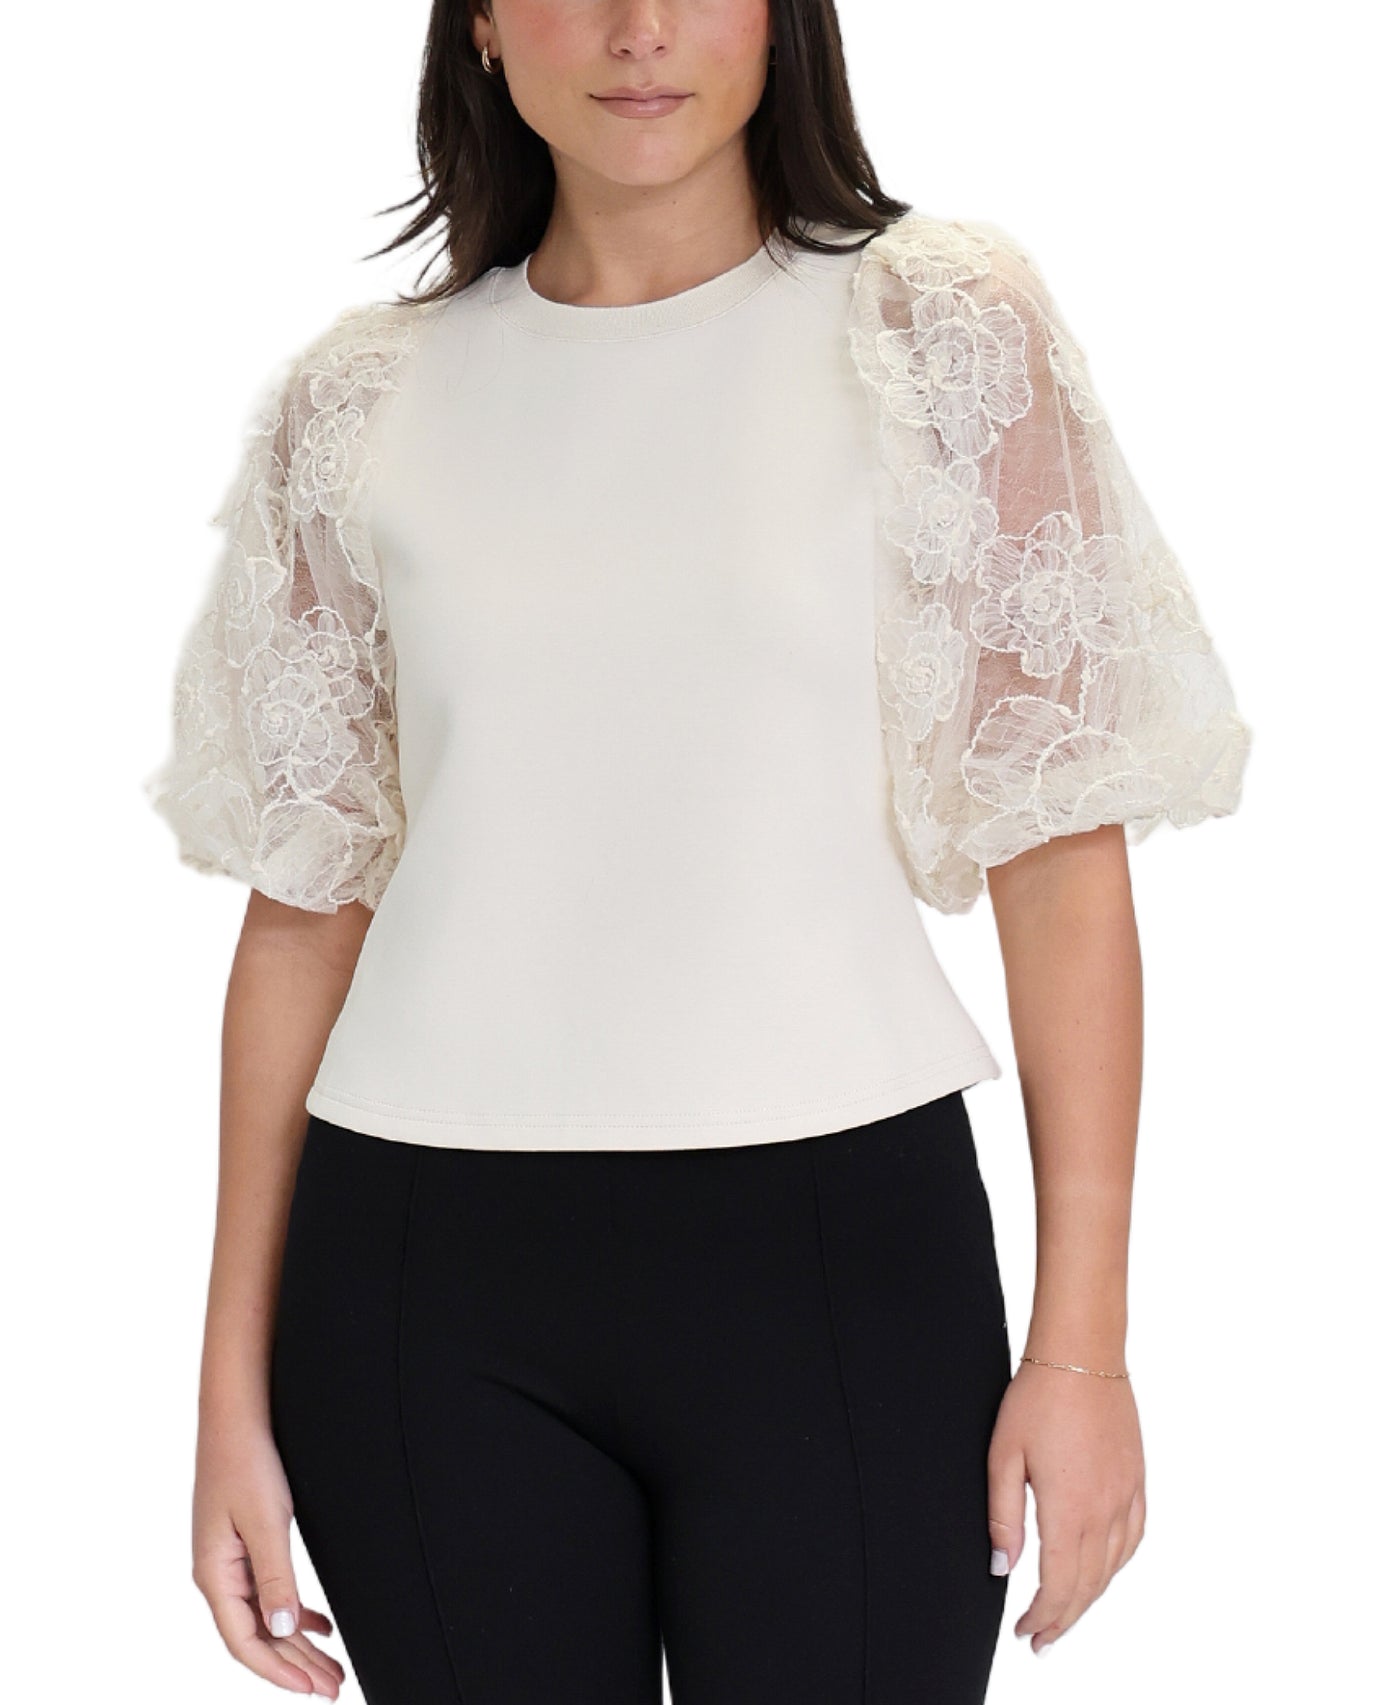 Scuba Top w/ Floral Lace Sleeves image 1